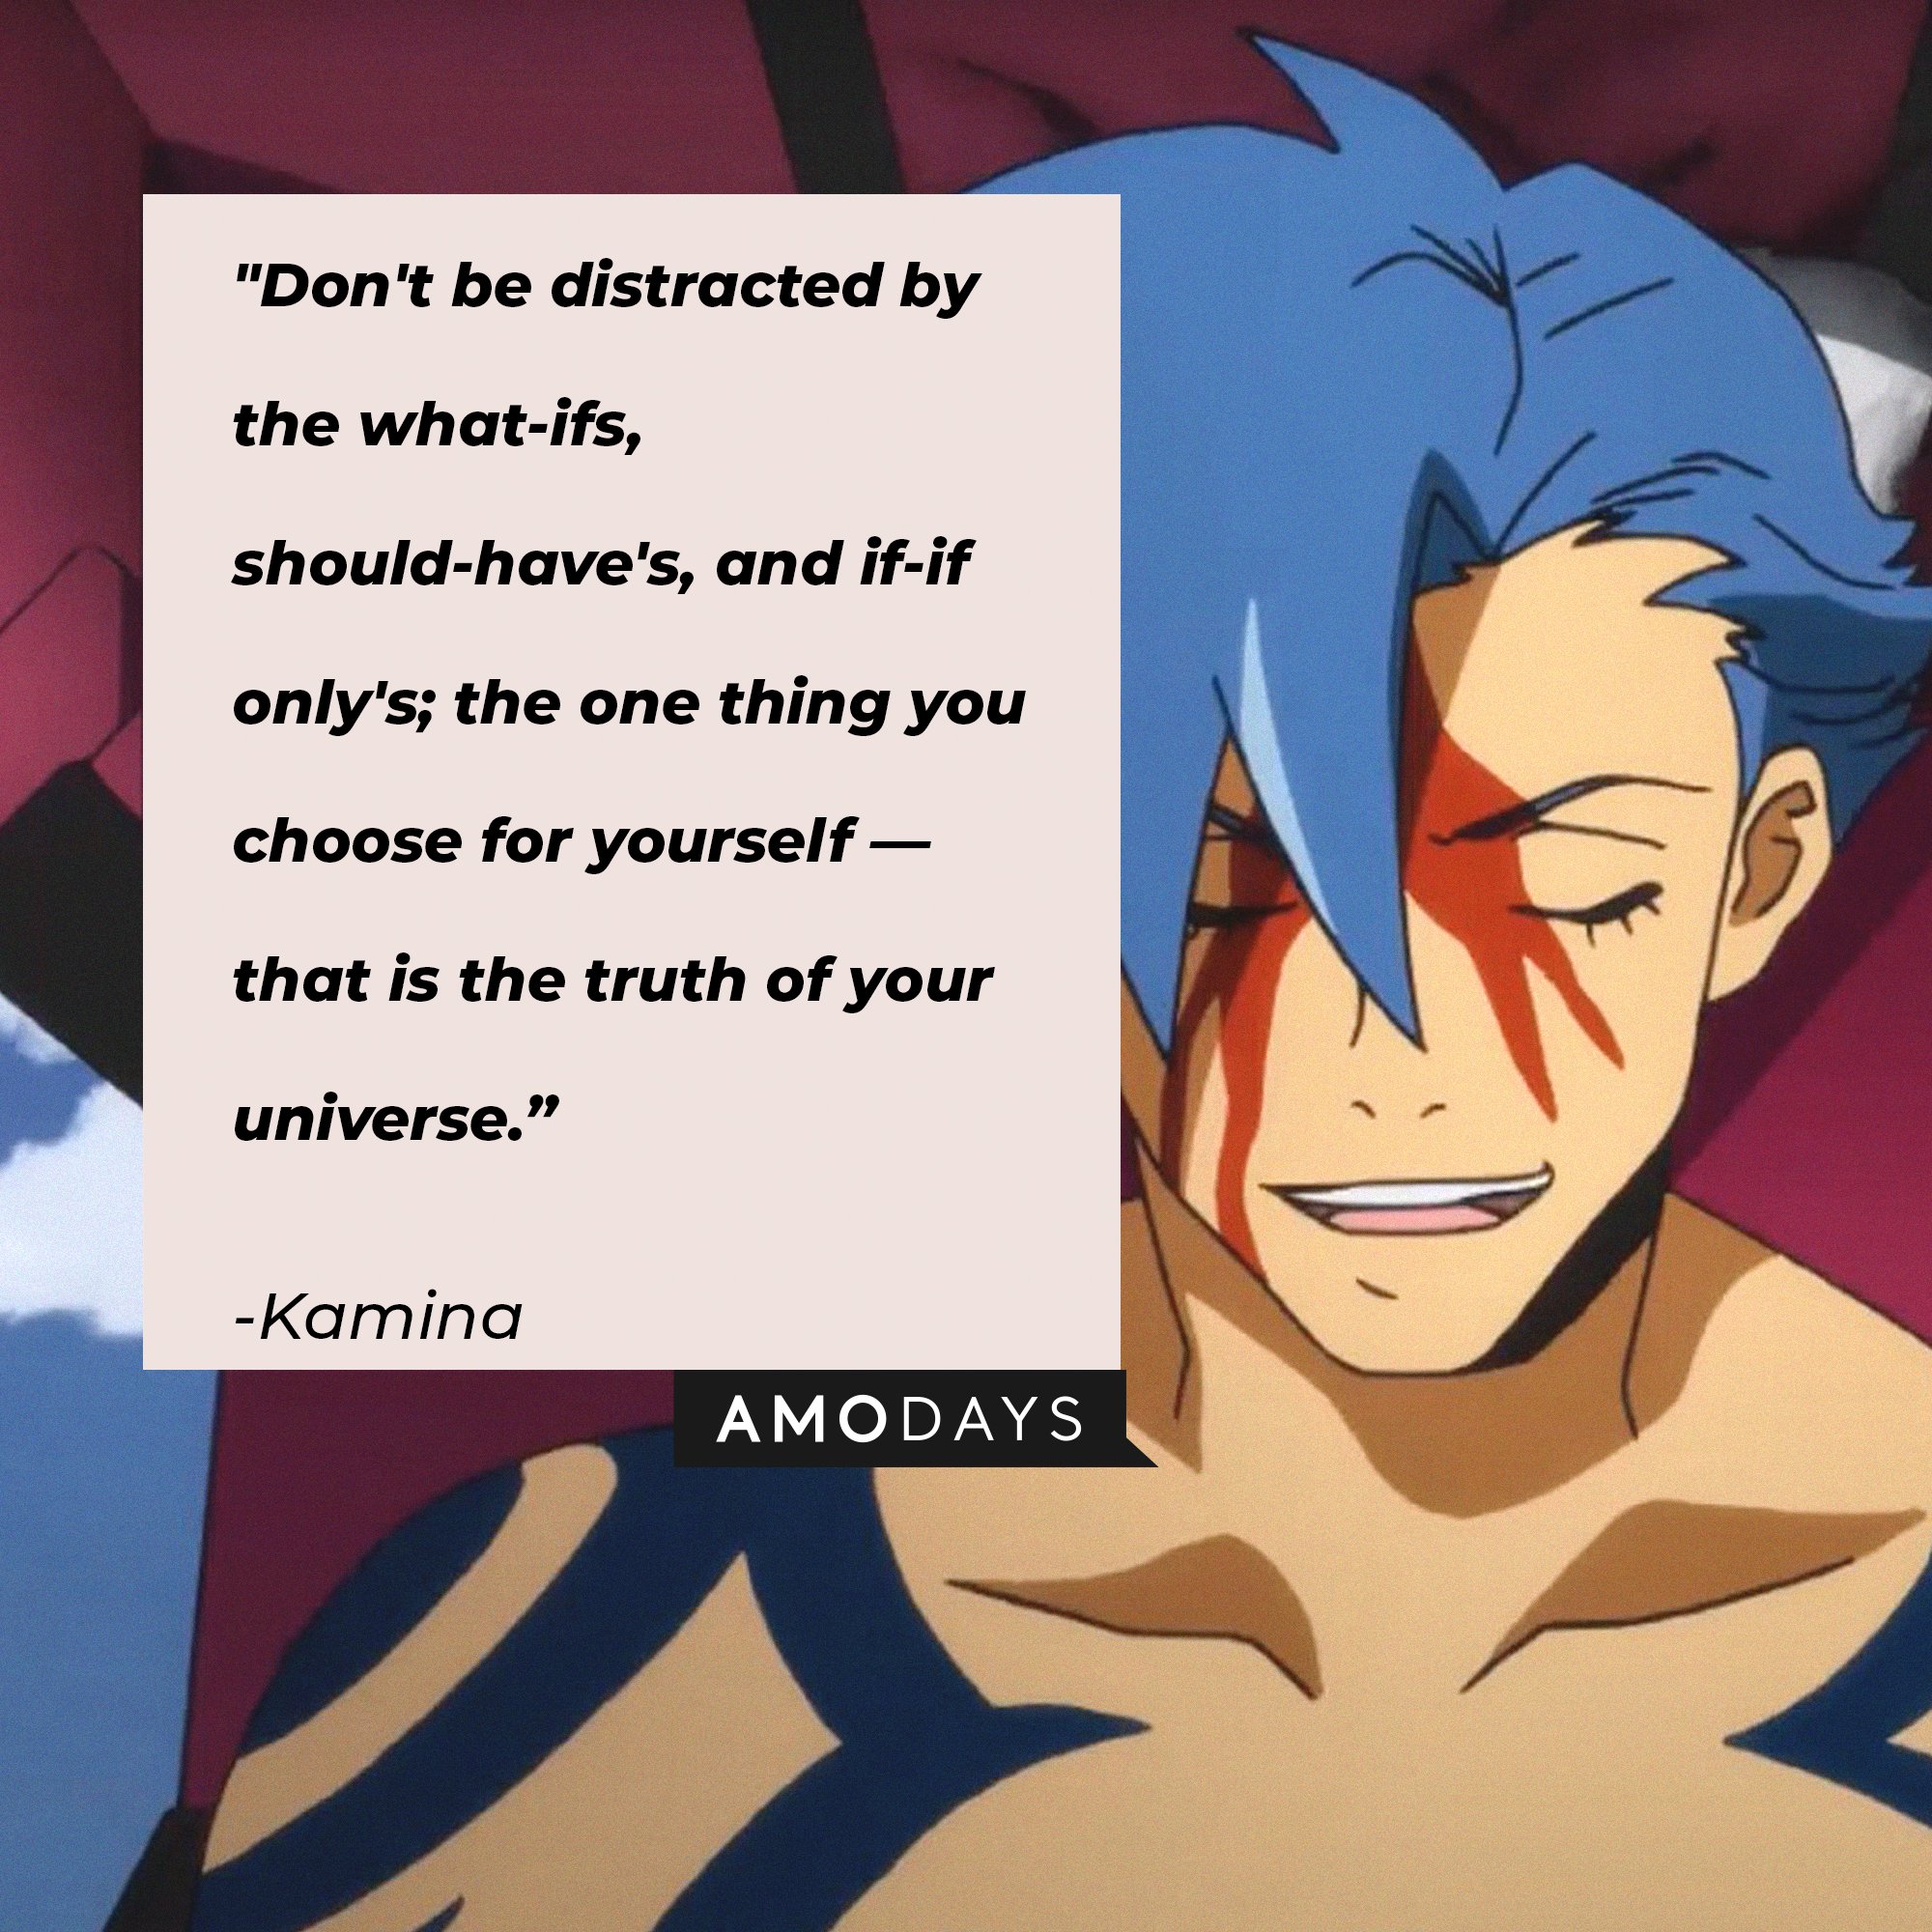 Kamina’s quote: "Don't be distracted by the what-ifs, should-haves, and if-if only's; the one thing you choose for yourself—that is the truth of your universe.” | Image: AmoDays    